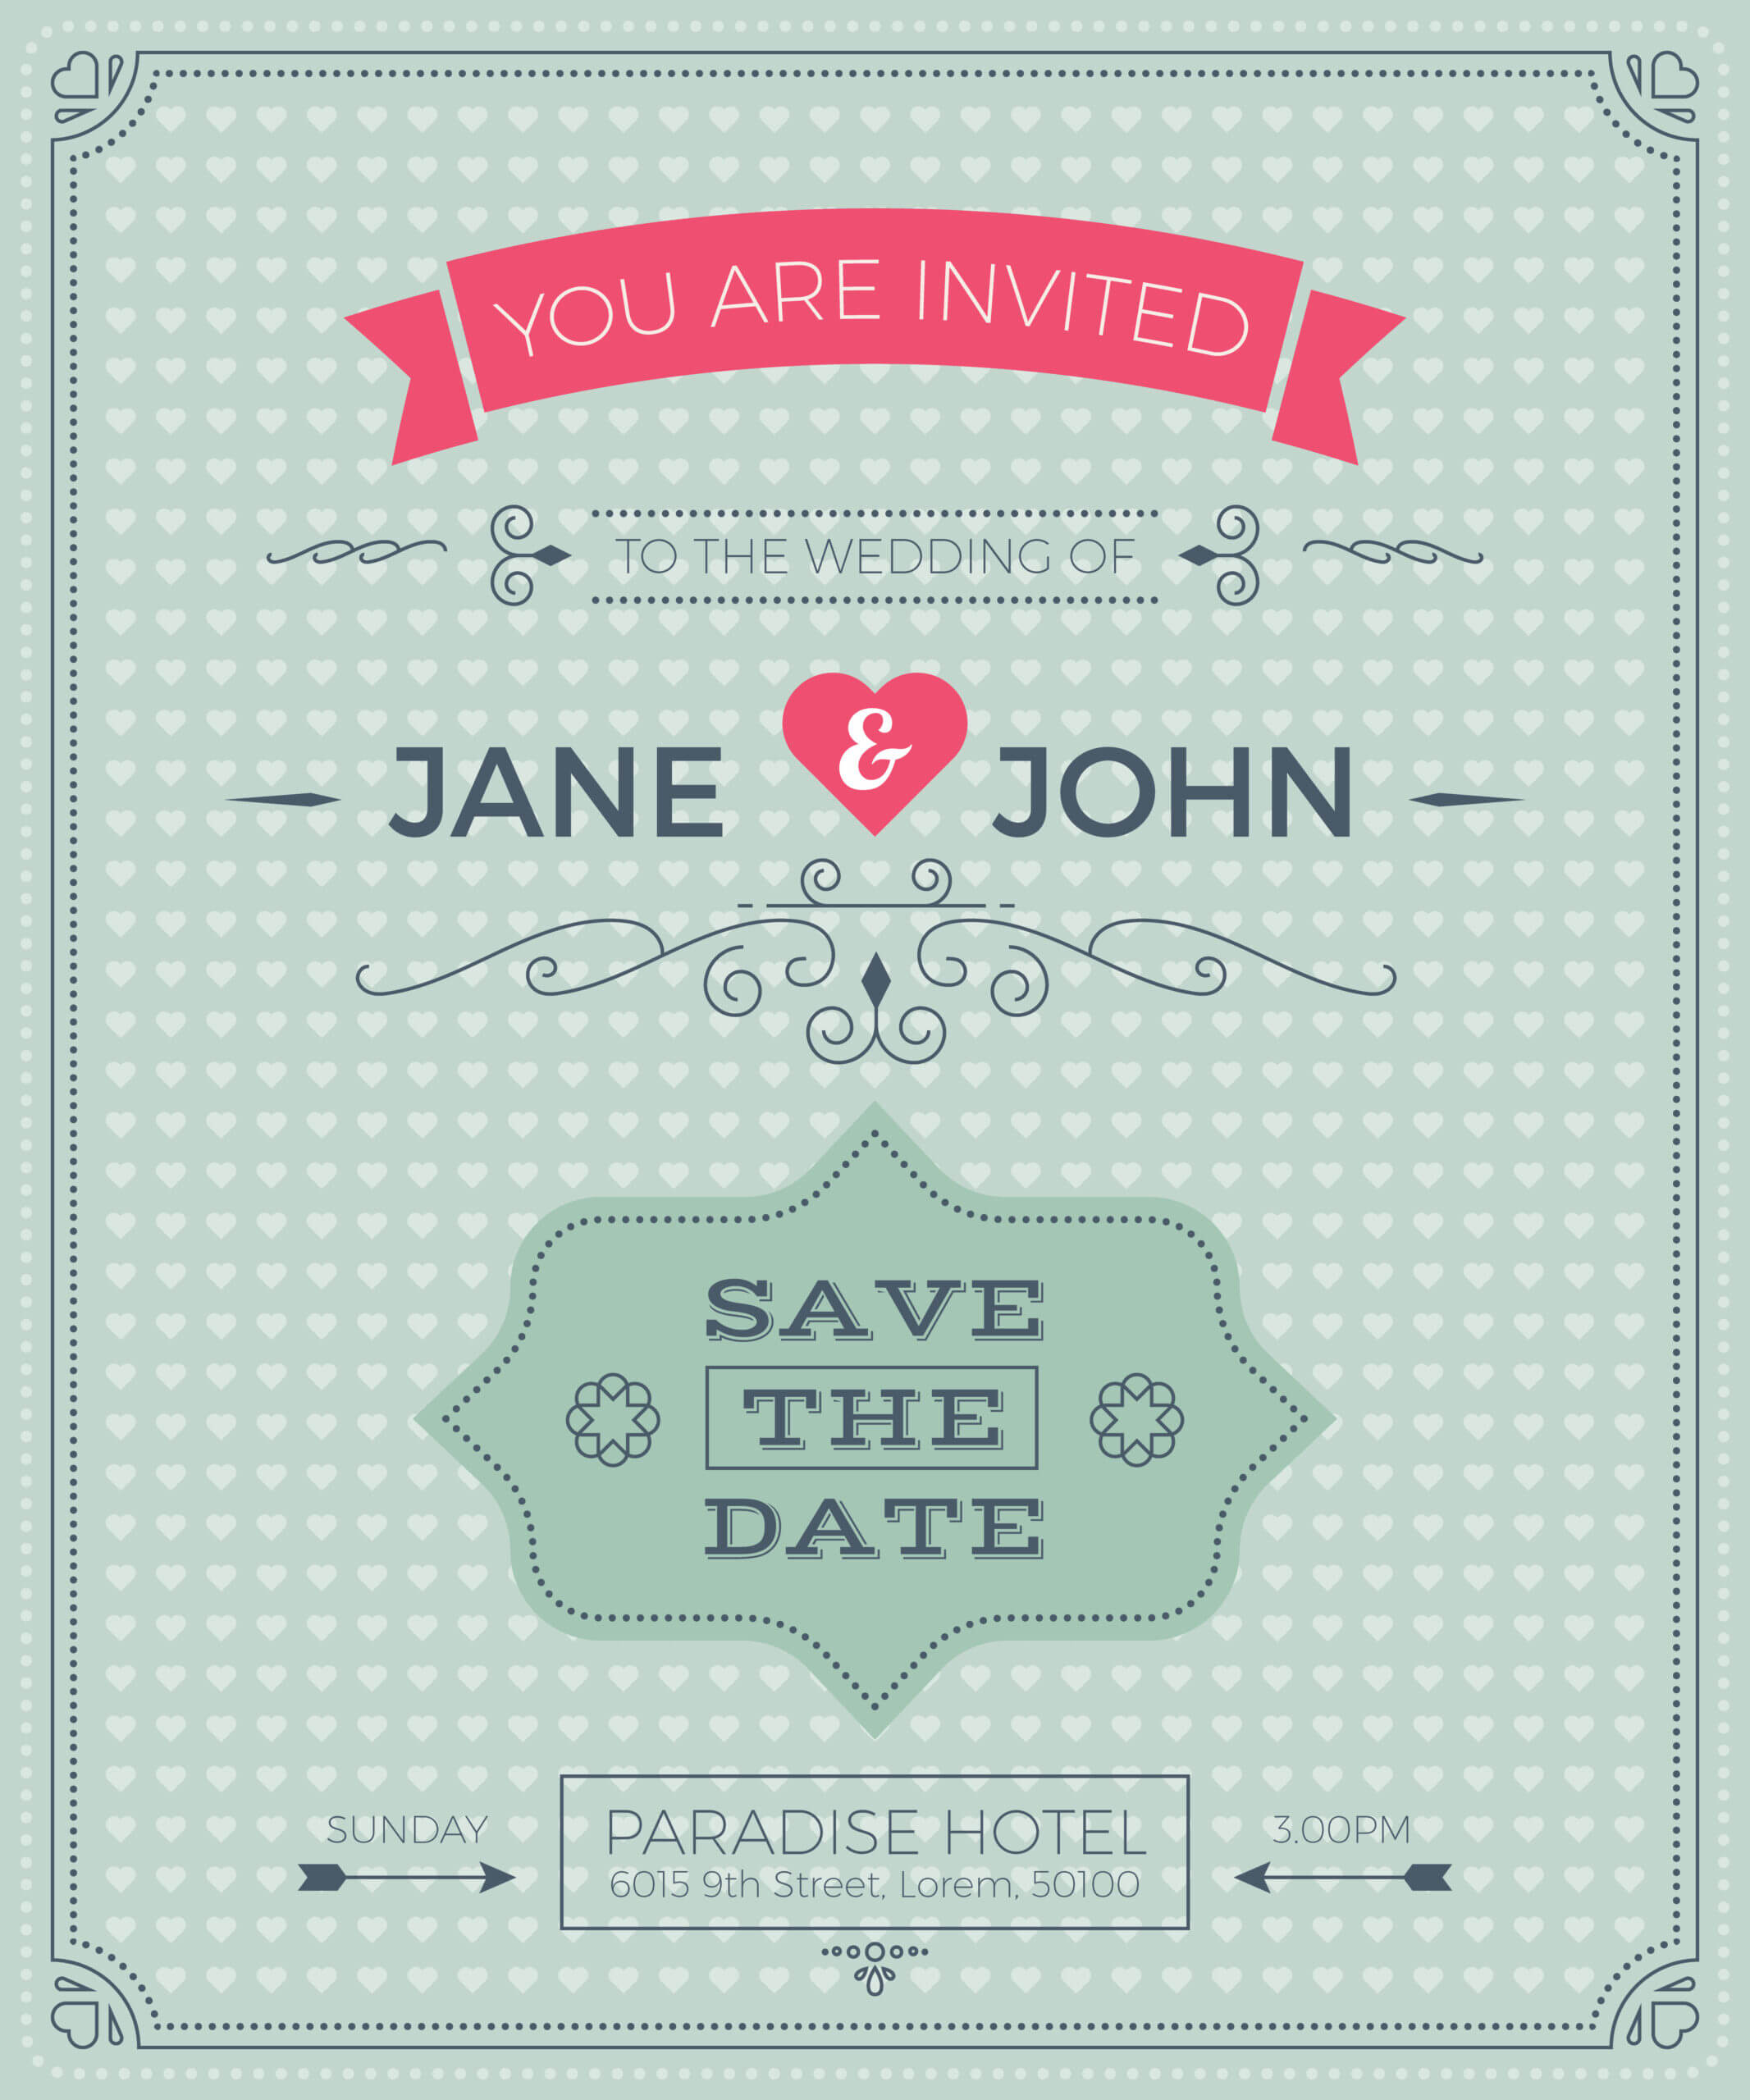 Vintage Wedding Invitation Card Template – Download Free Throughout Ss Card Template